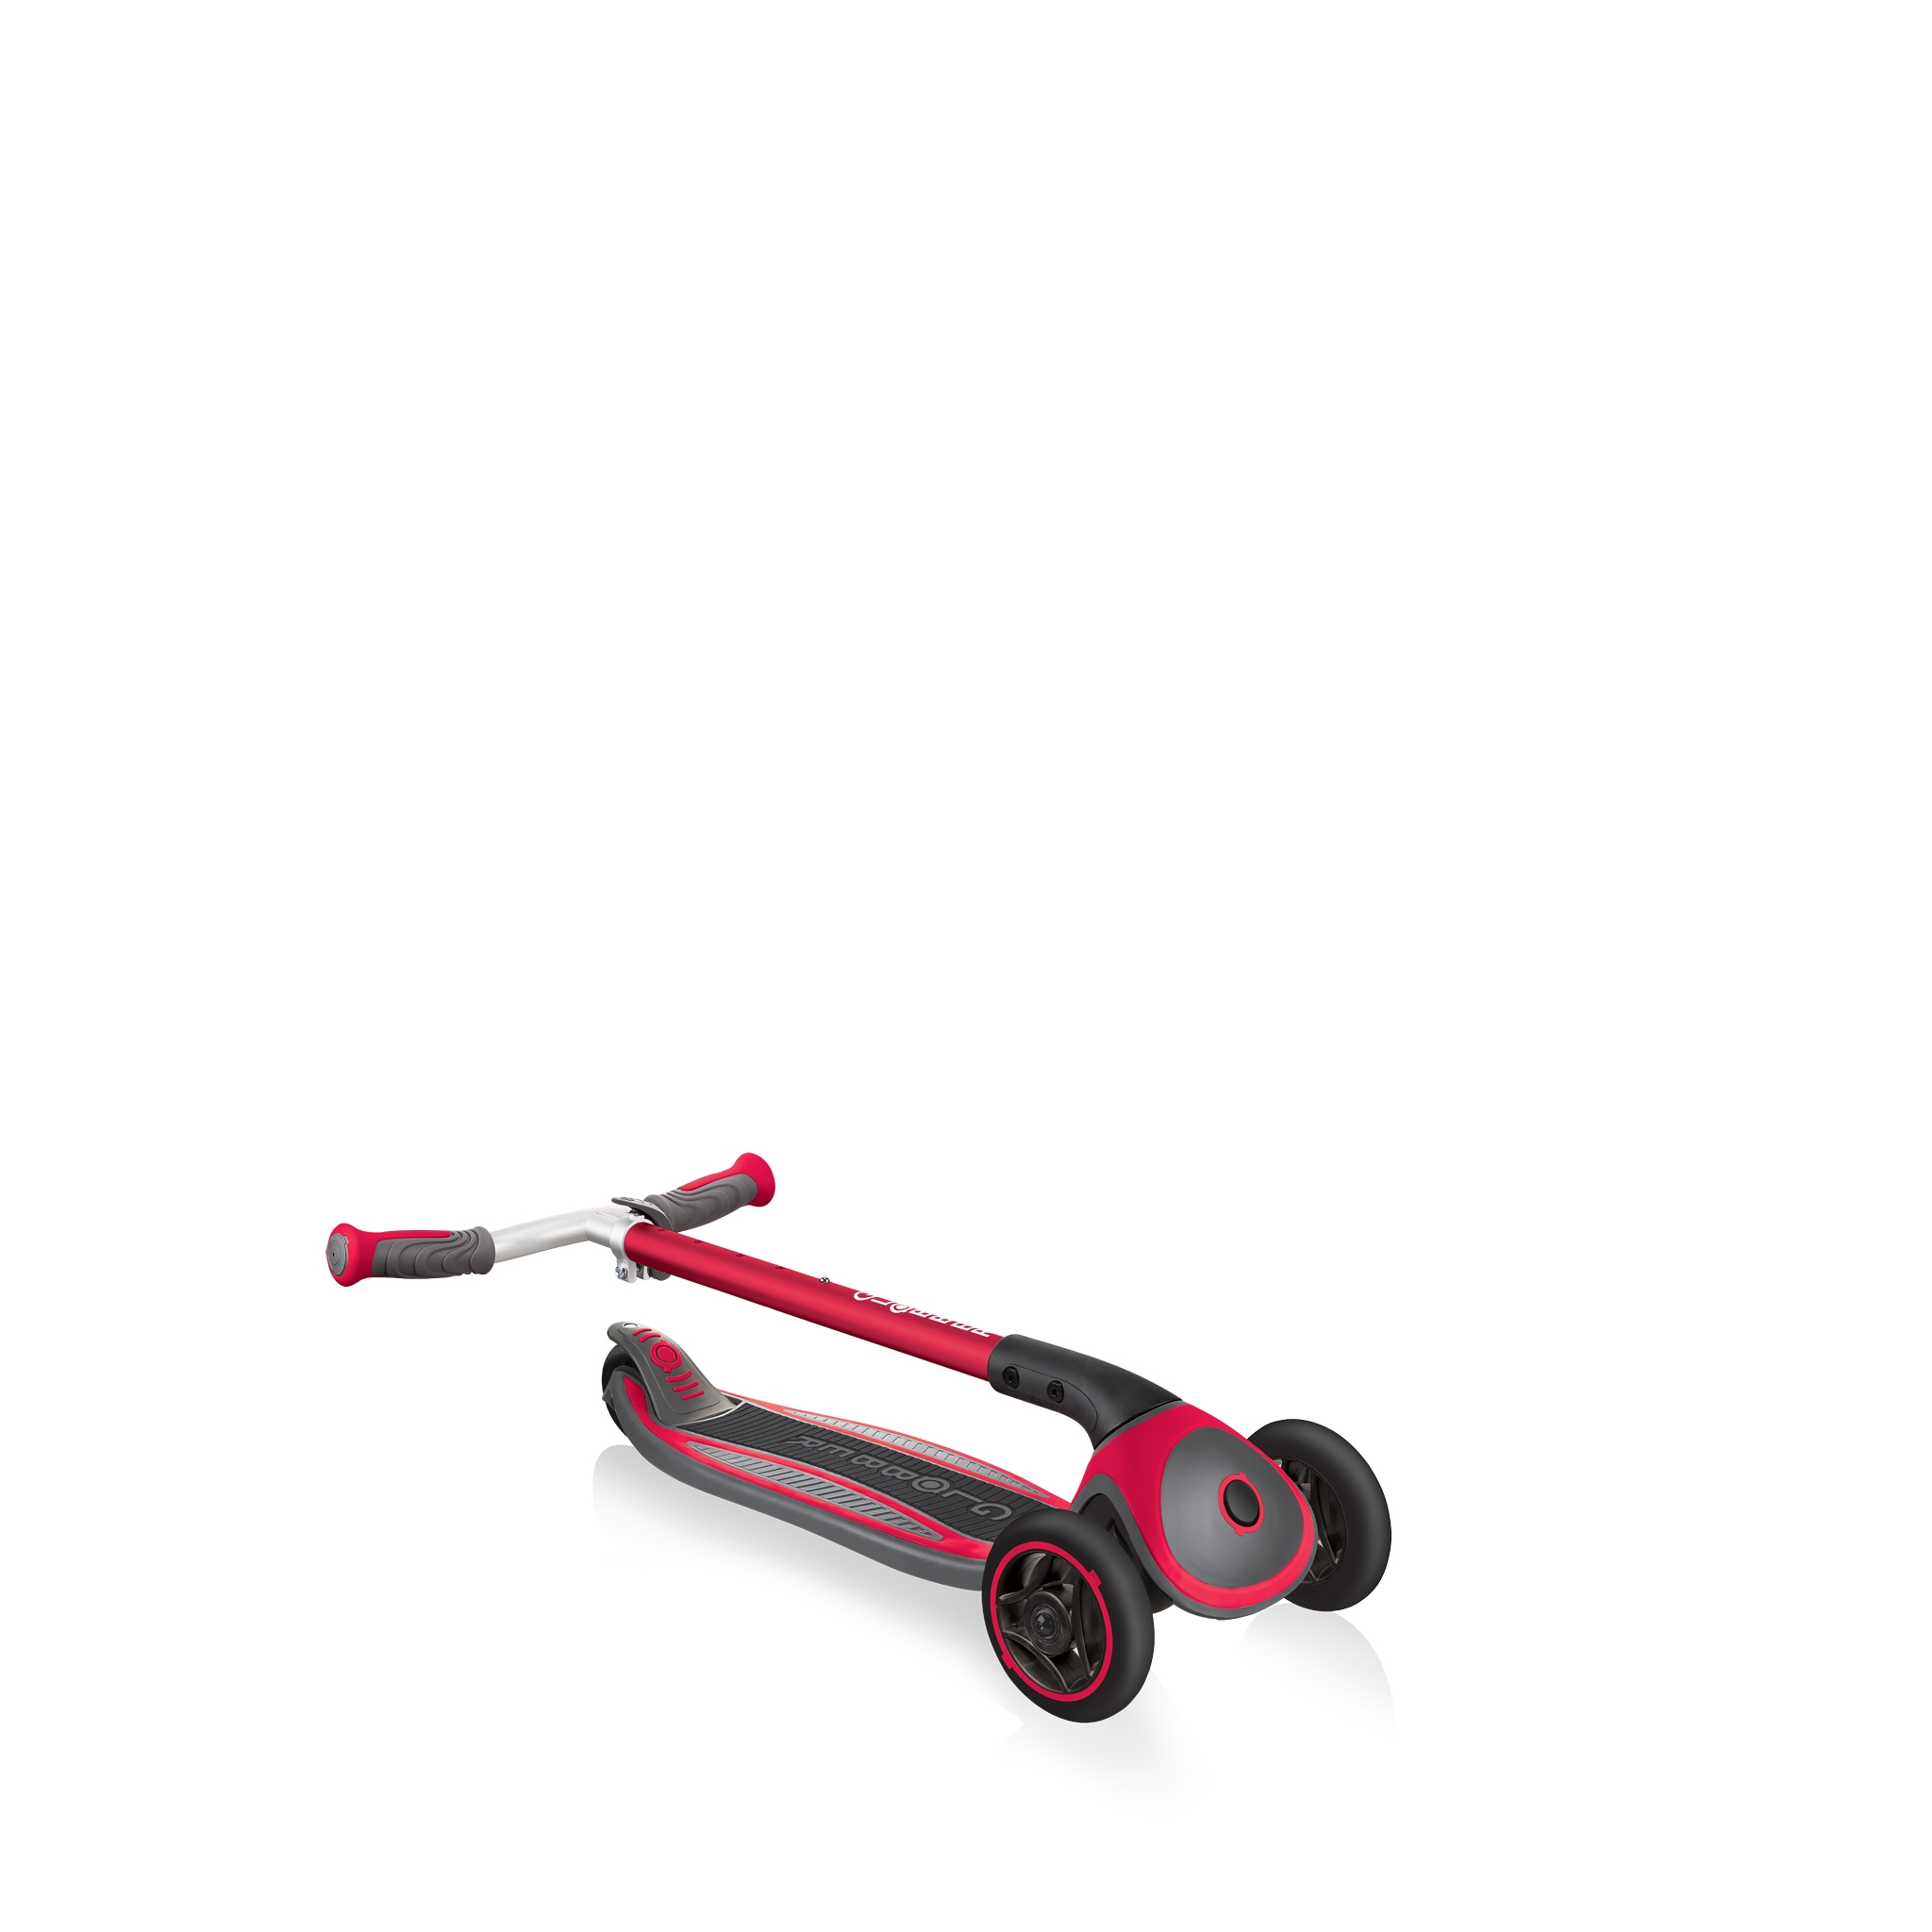 Globber-MASTER-convenient-foldable-3-wheel-scooter-for-kids-with-patented-folding-system_black-red 3